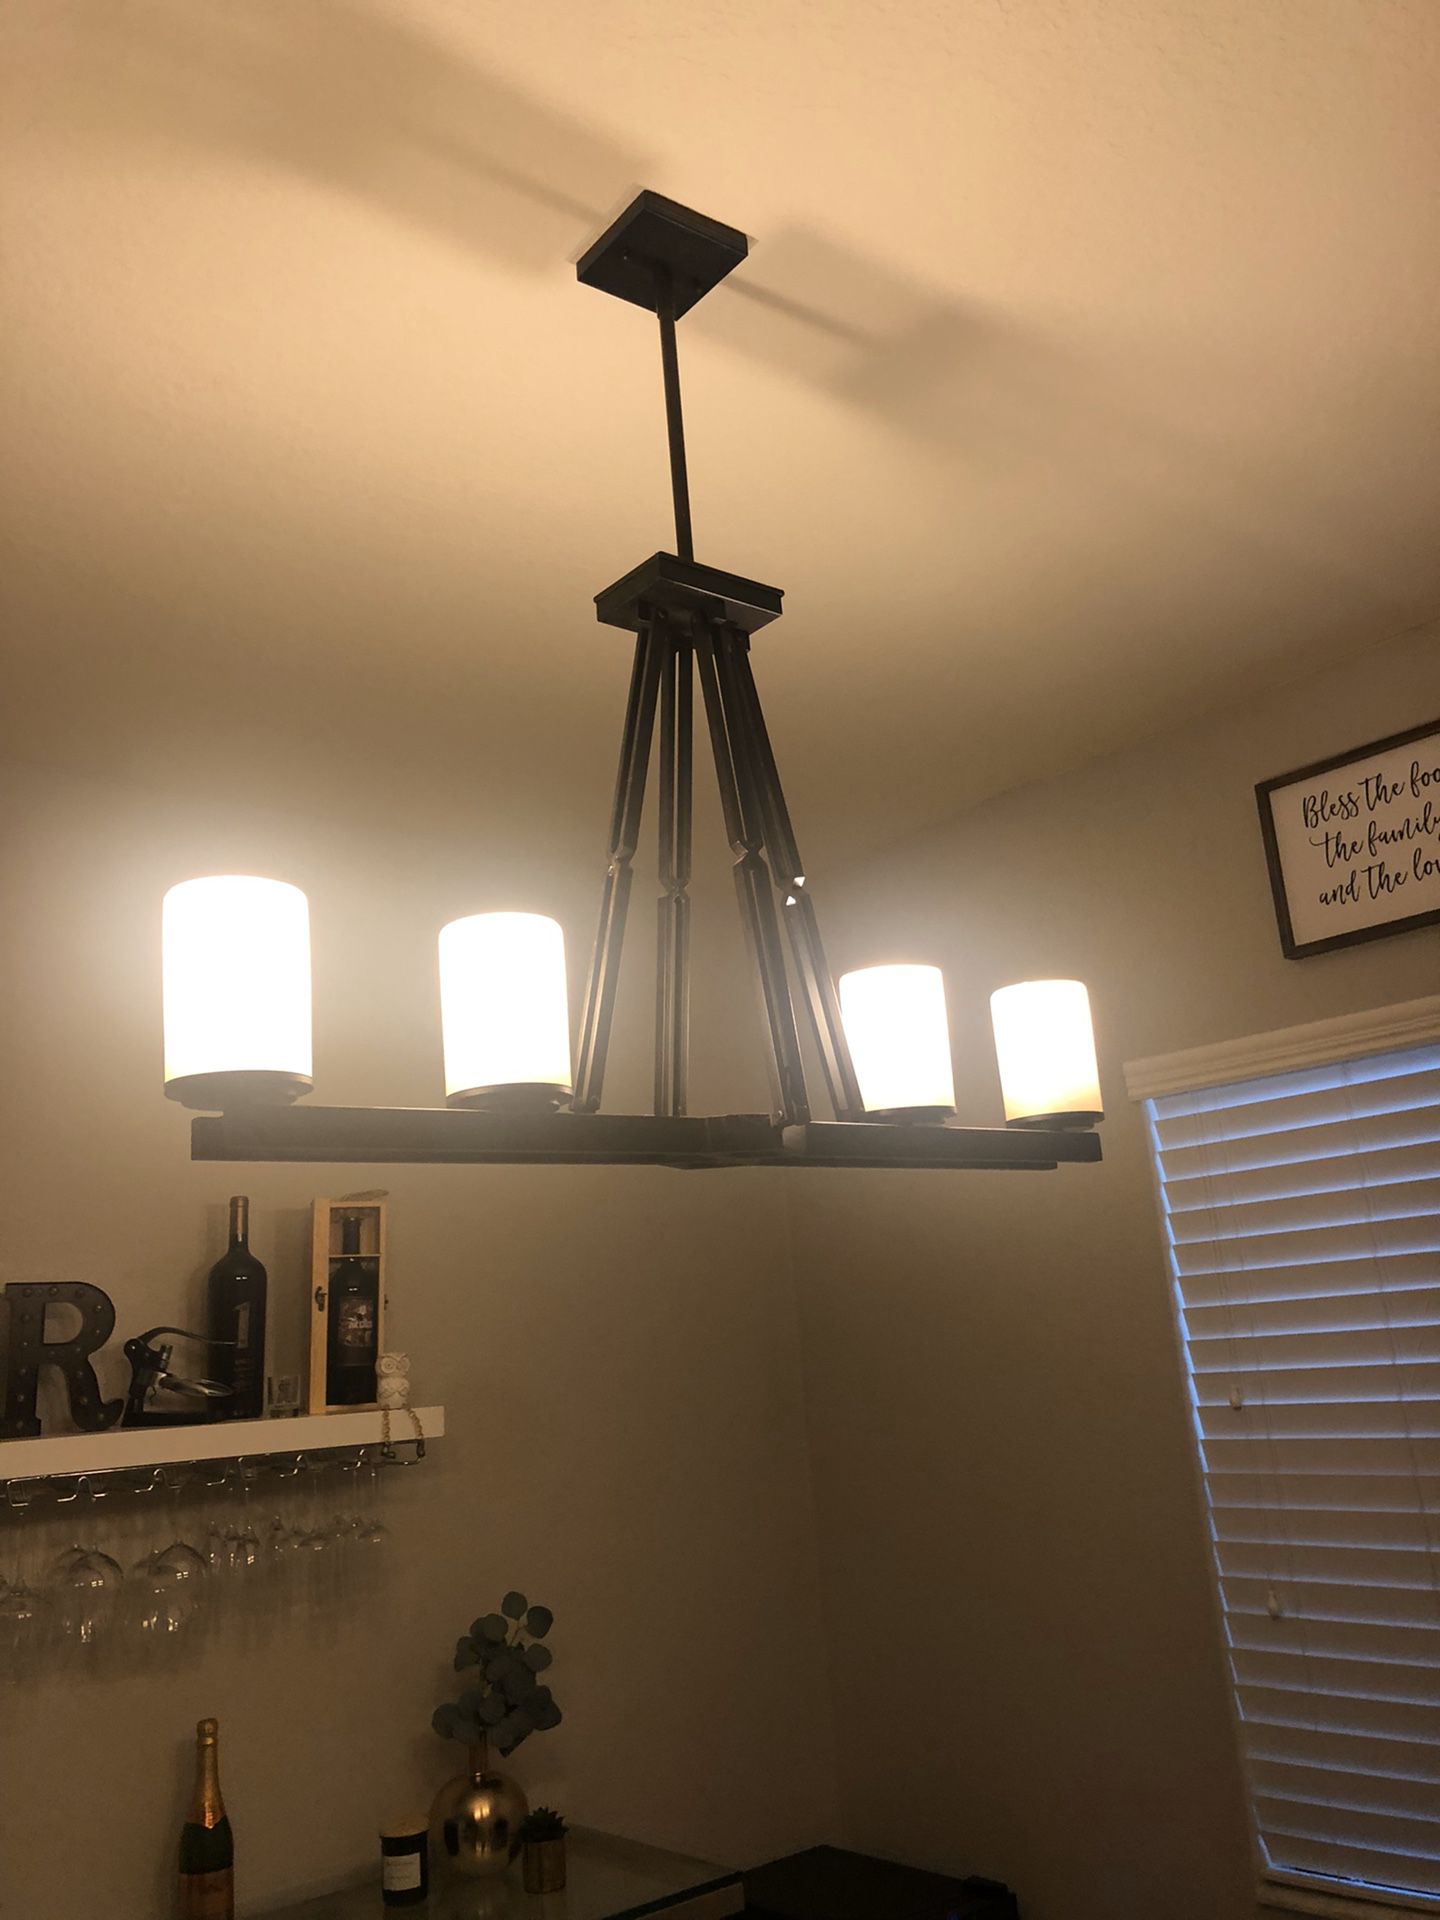 Dining room ceiling light fixture